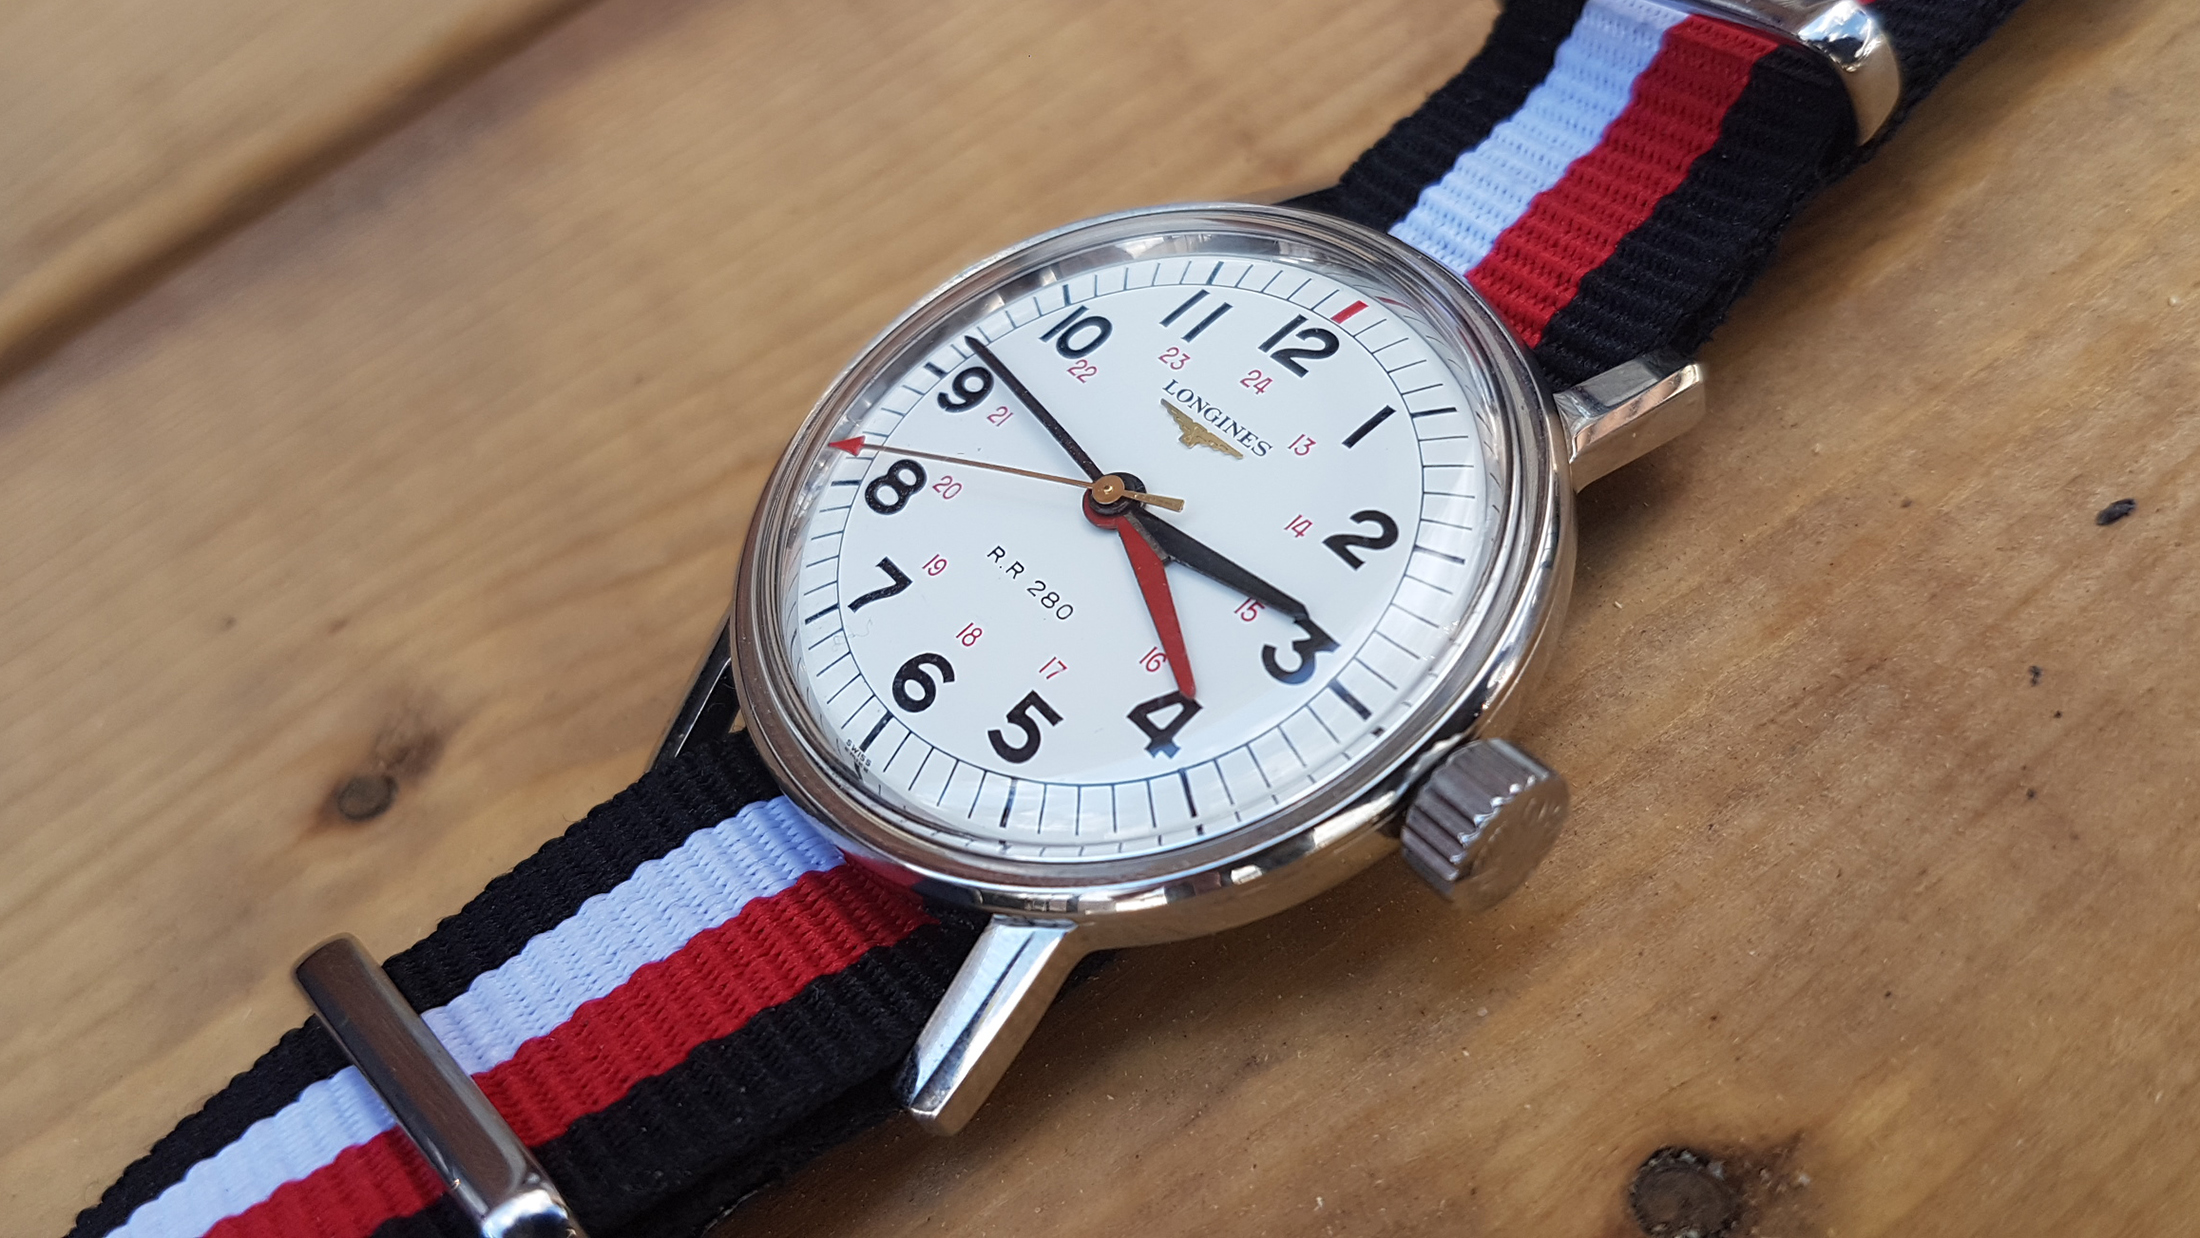 Omega - Opinion on this Omega RailRoad Wristwatch..